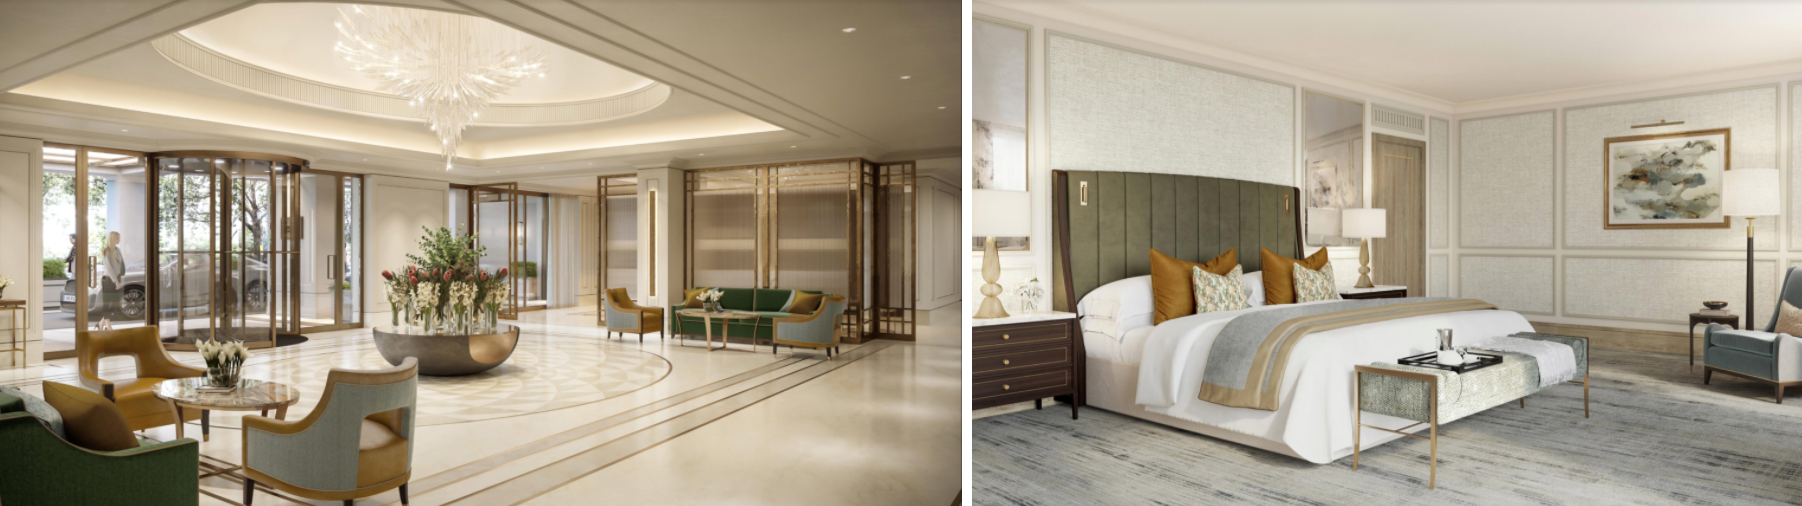 THE CARLTON TOWER BRINGS CONTEMPORARY LUXURY AND CLASSIC ELEGANCE TO KNIGHTSBRIDGE HOME 